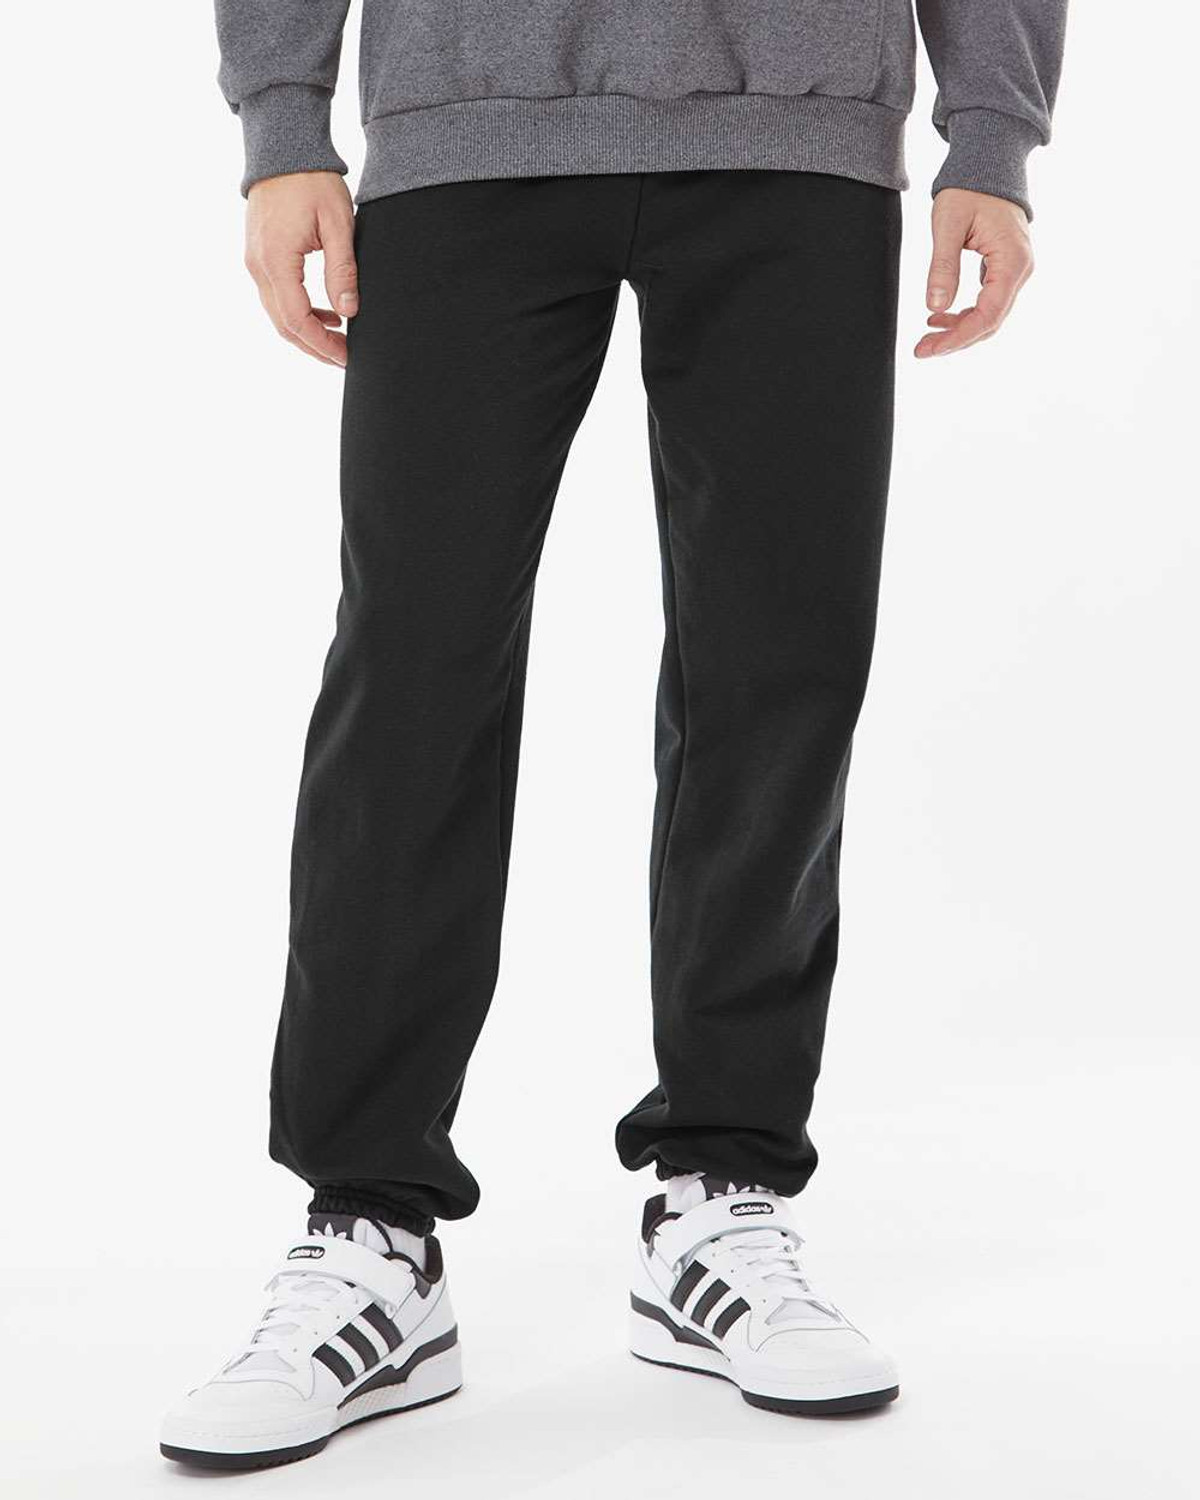 King Fashion Pocketed Sweatpants With Elastic Cuffs